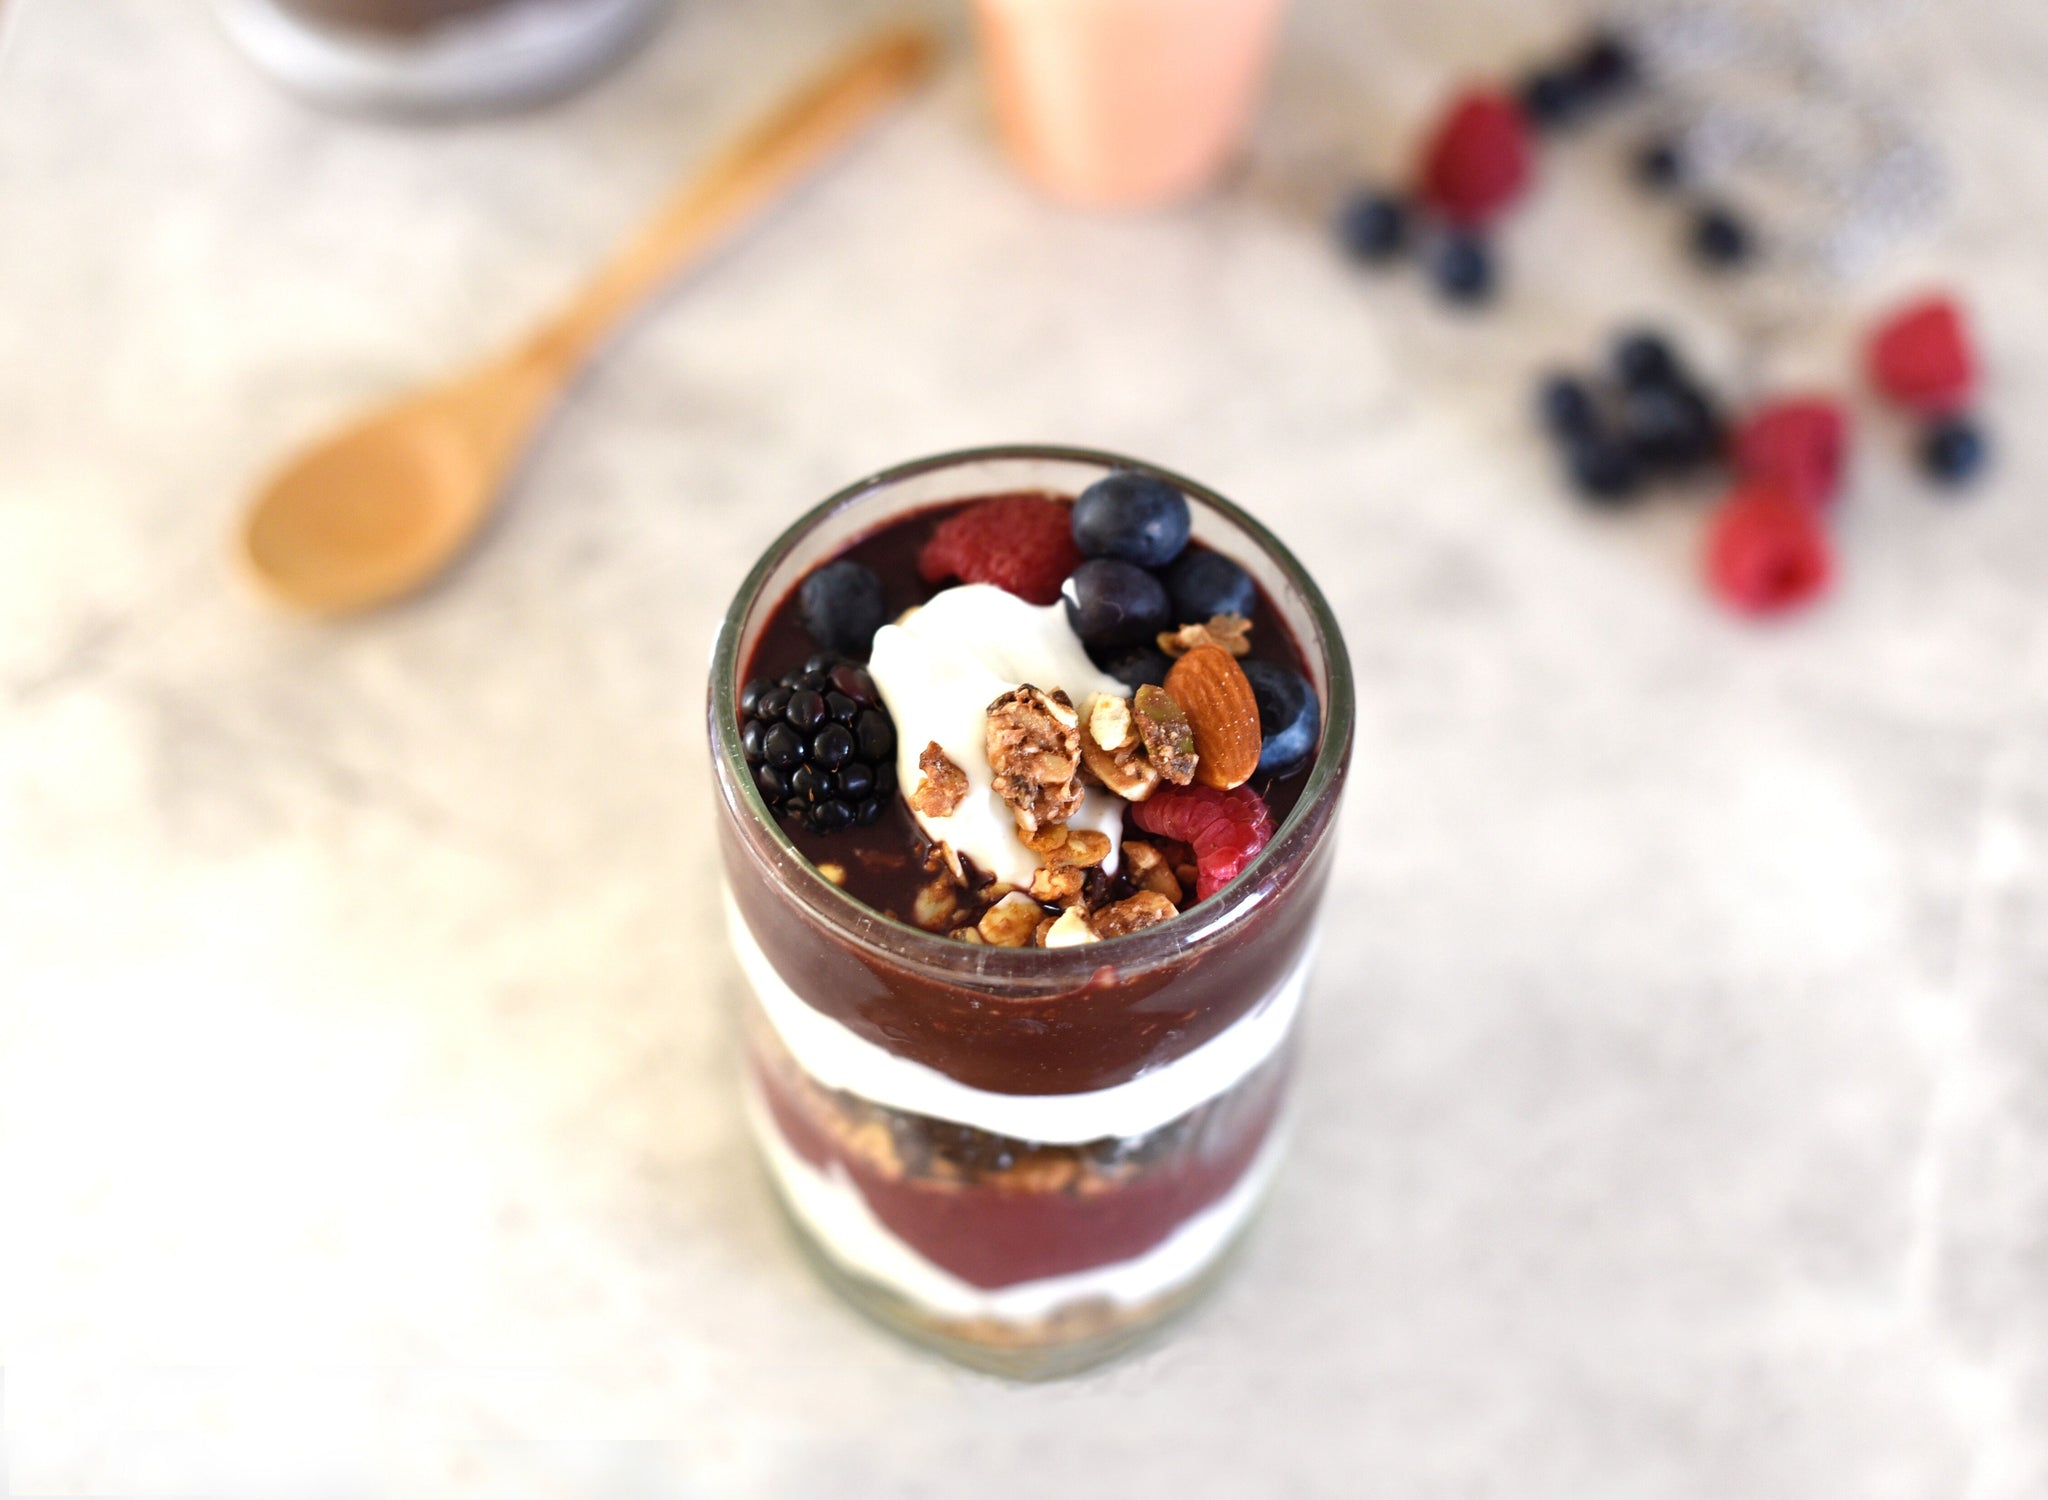 Raw Chocolate and Summer Fruit Parfaits: A Refreshing Dessert